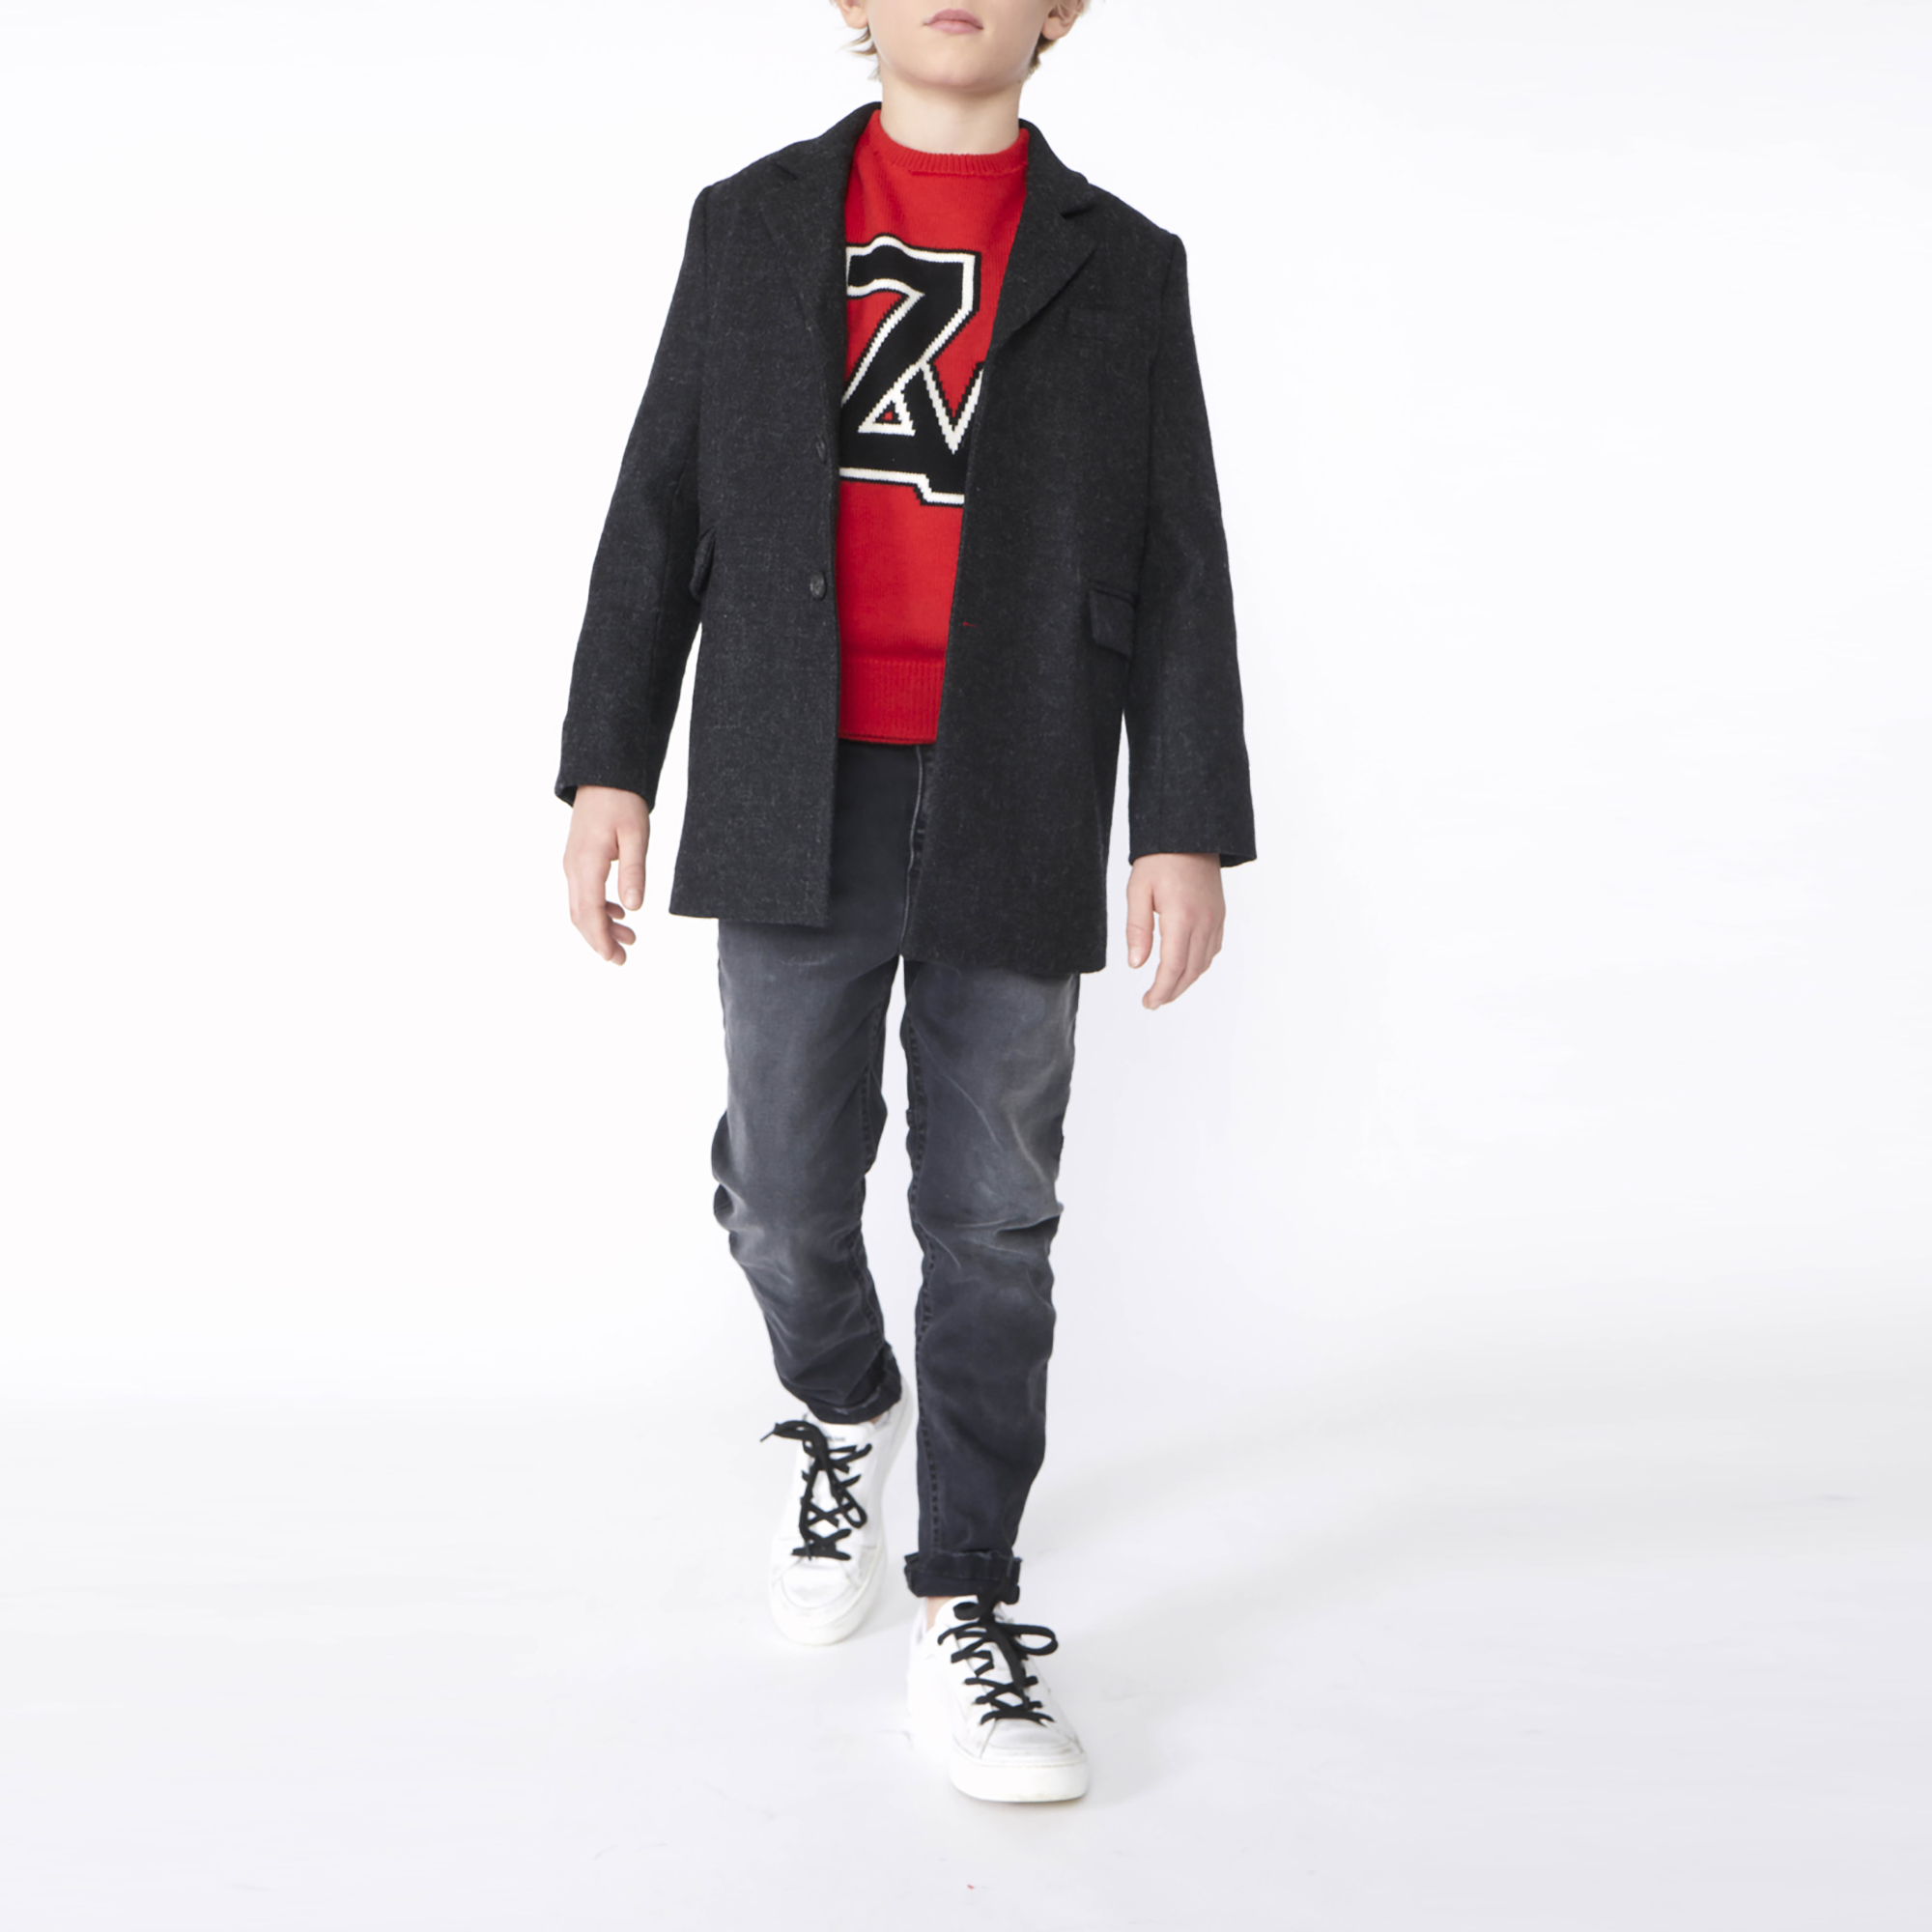 Wool Sweater ZADIG & VOLTAIRE for BOY